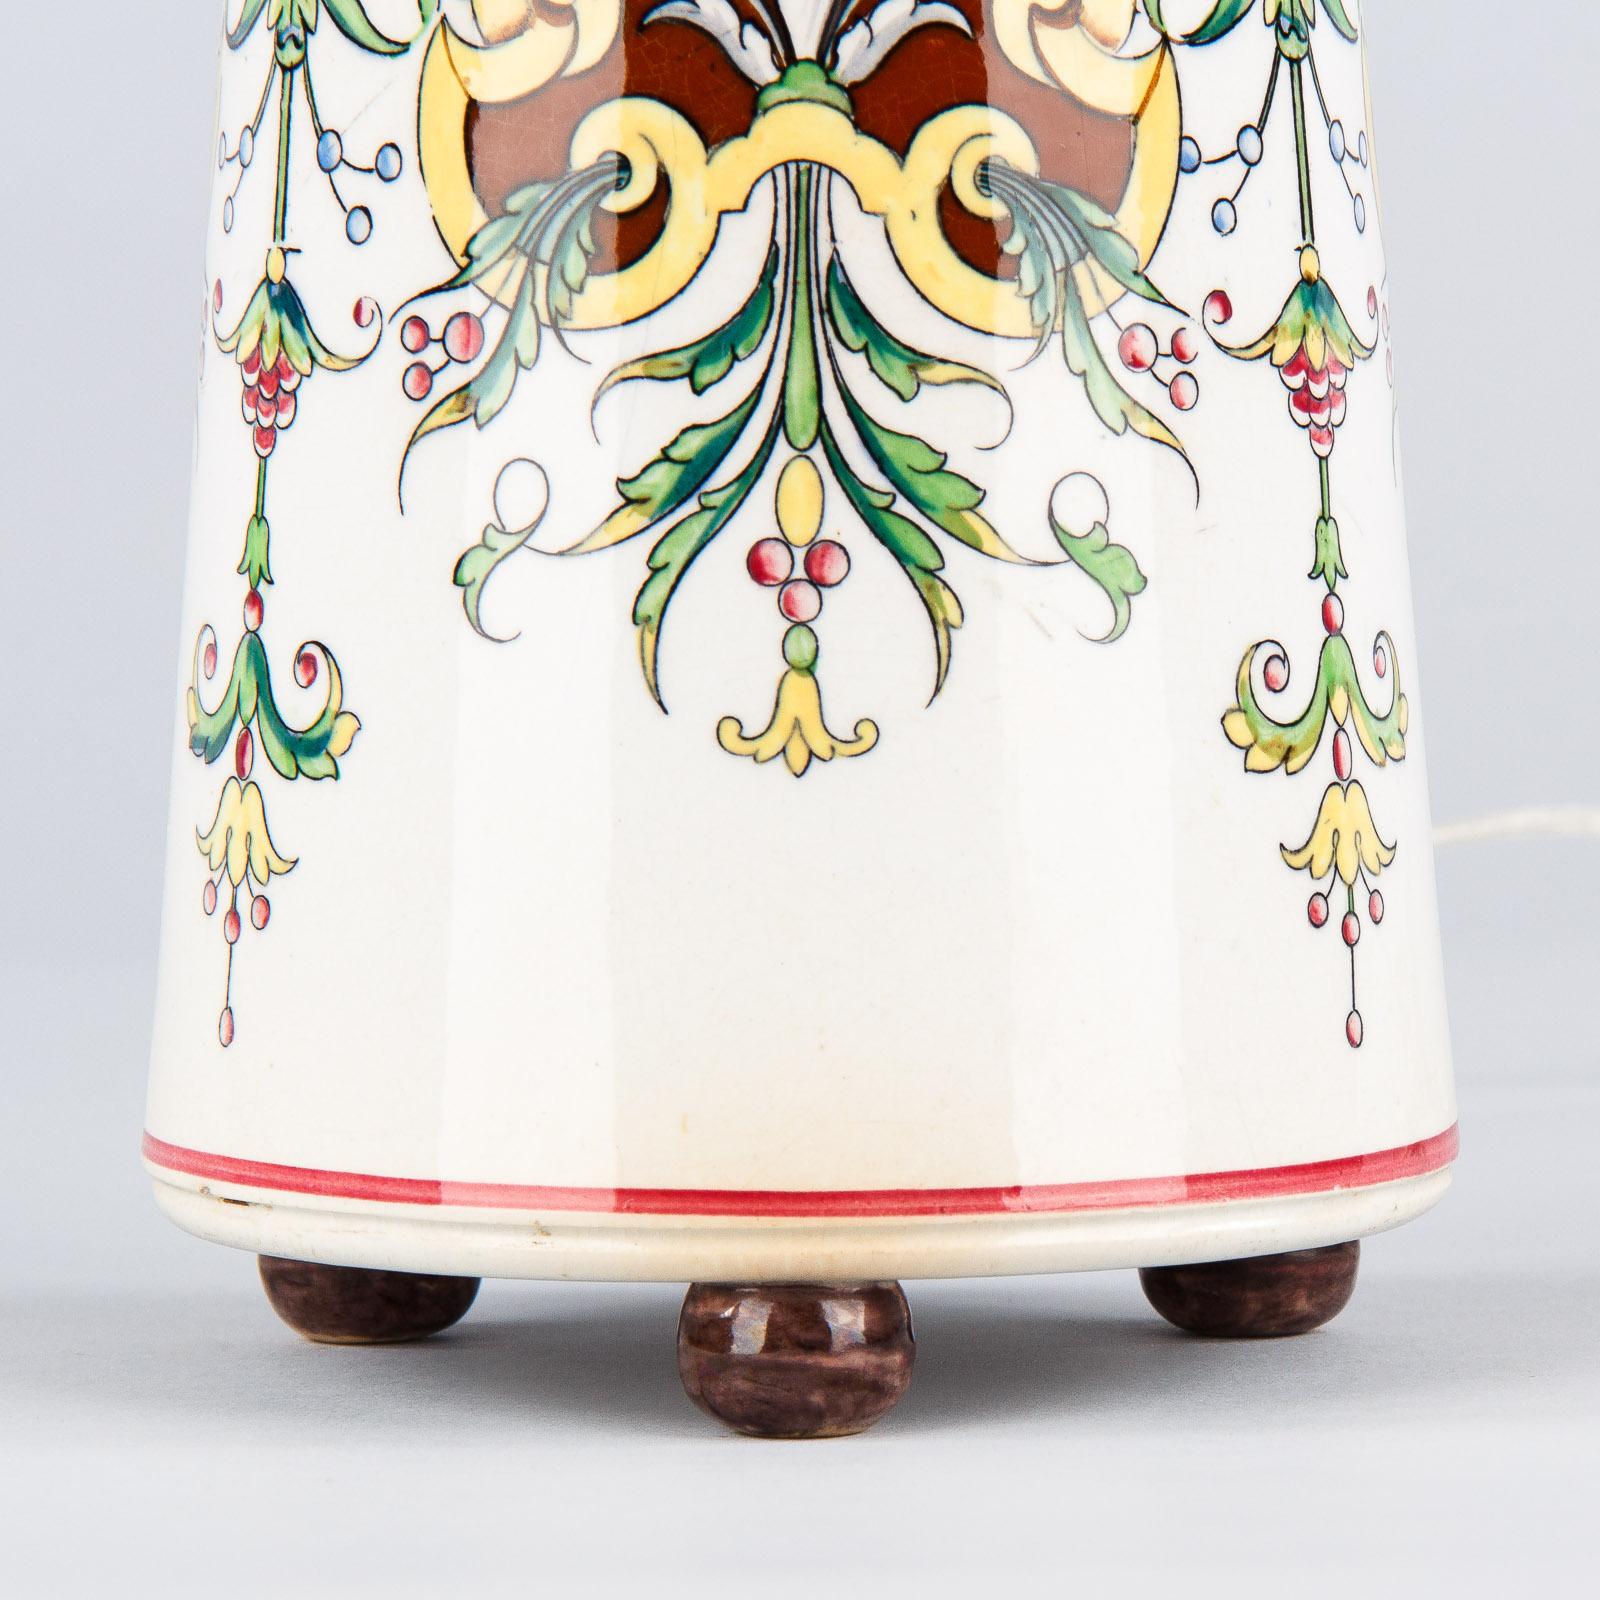 20th Century French Art Nouveau Ceramic Lamp, Early 1900s